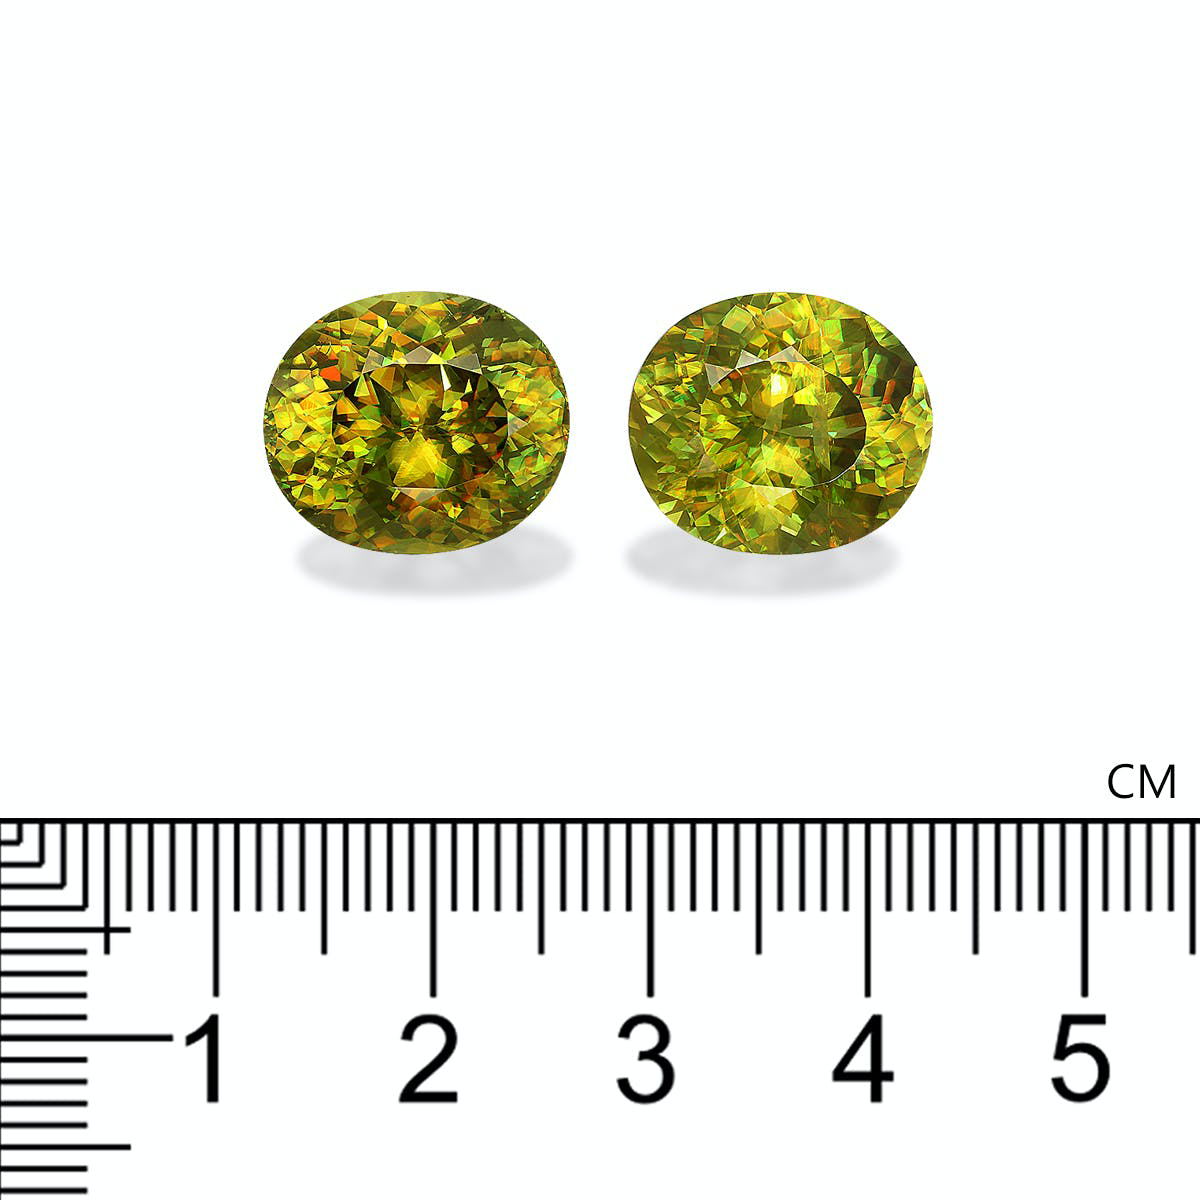 Picture of Lime Green Sphene 18.55ct - 14x12mm Pair (SH1149)